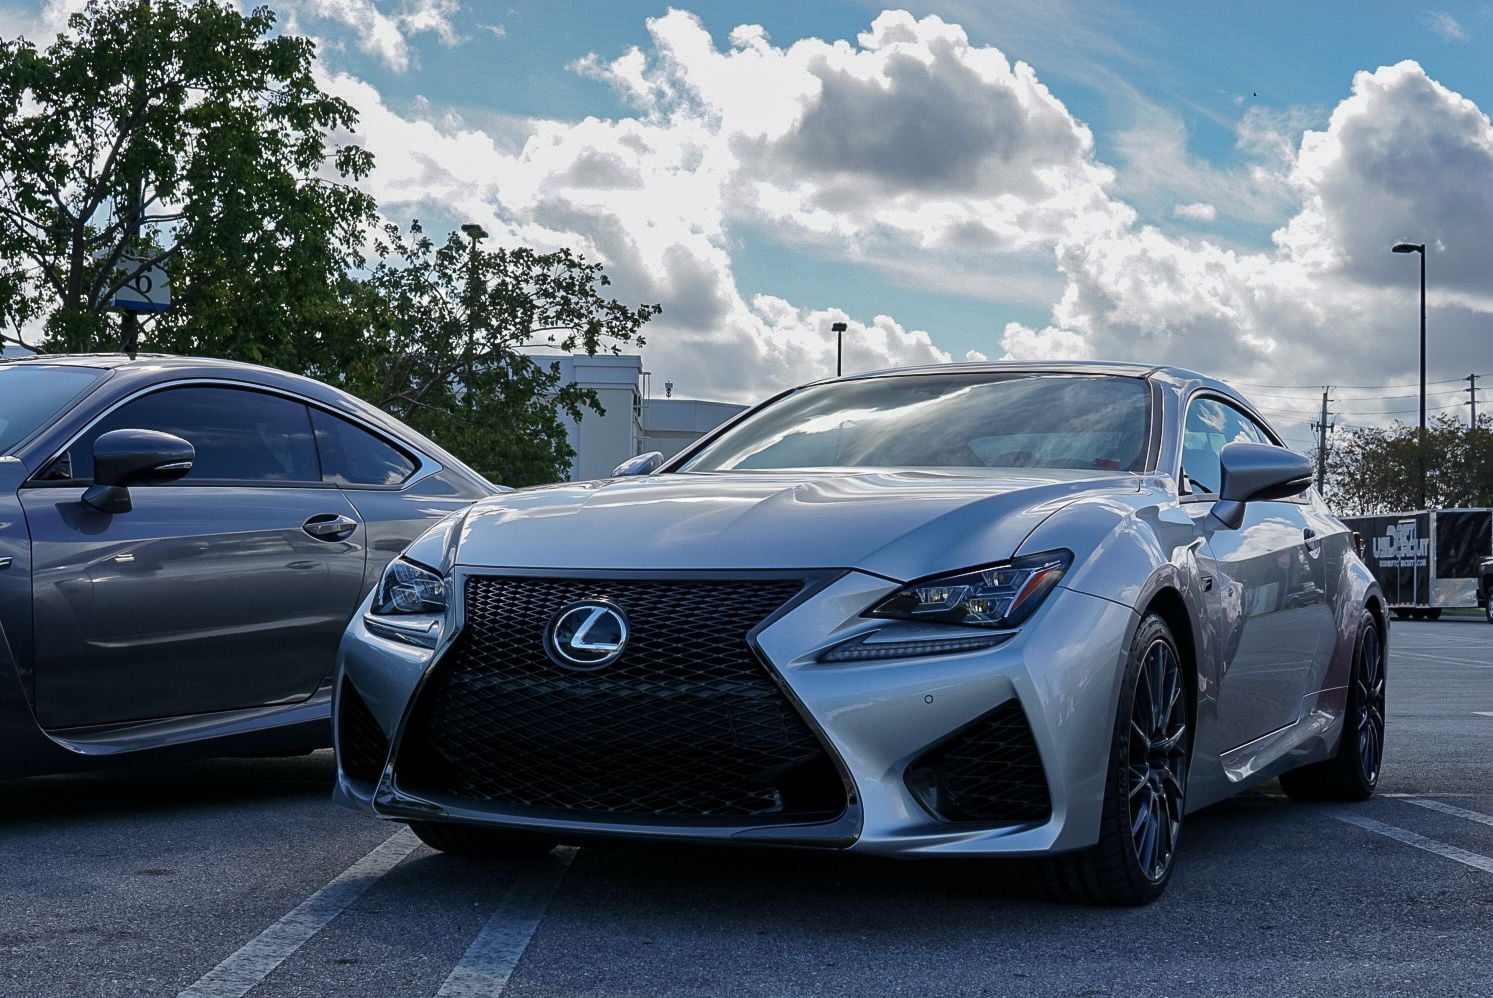 2015 Lexus RC F - CPO Second owner 2015 LEXUS RCF Clean title - Used - VIN JTHHP5BC0F5003851 - 18,000 Miles - 8 cyl - 2WD - Automatic - Coupe - Silver - West Palm Beach, FL 33411, United States